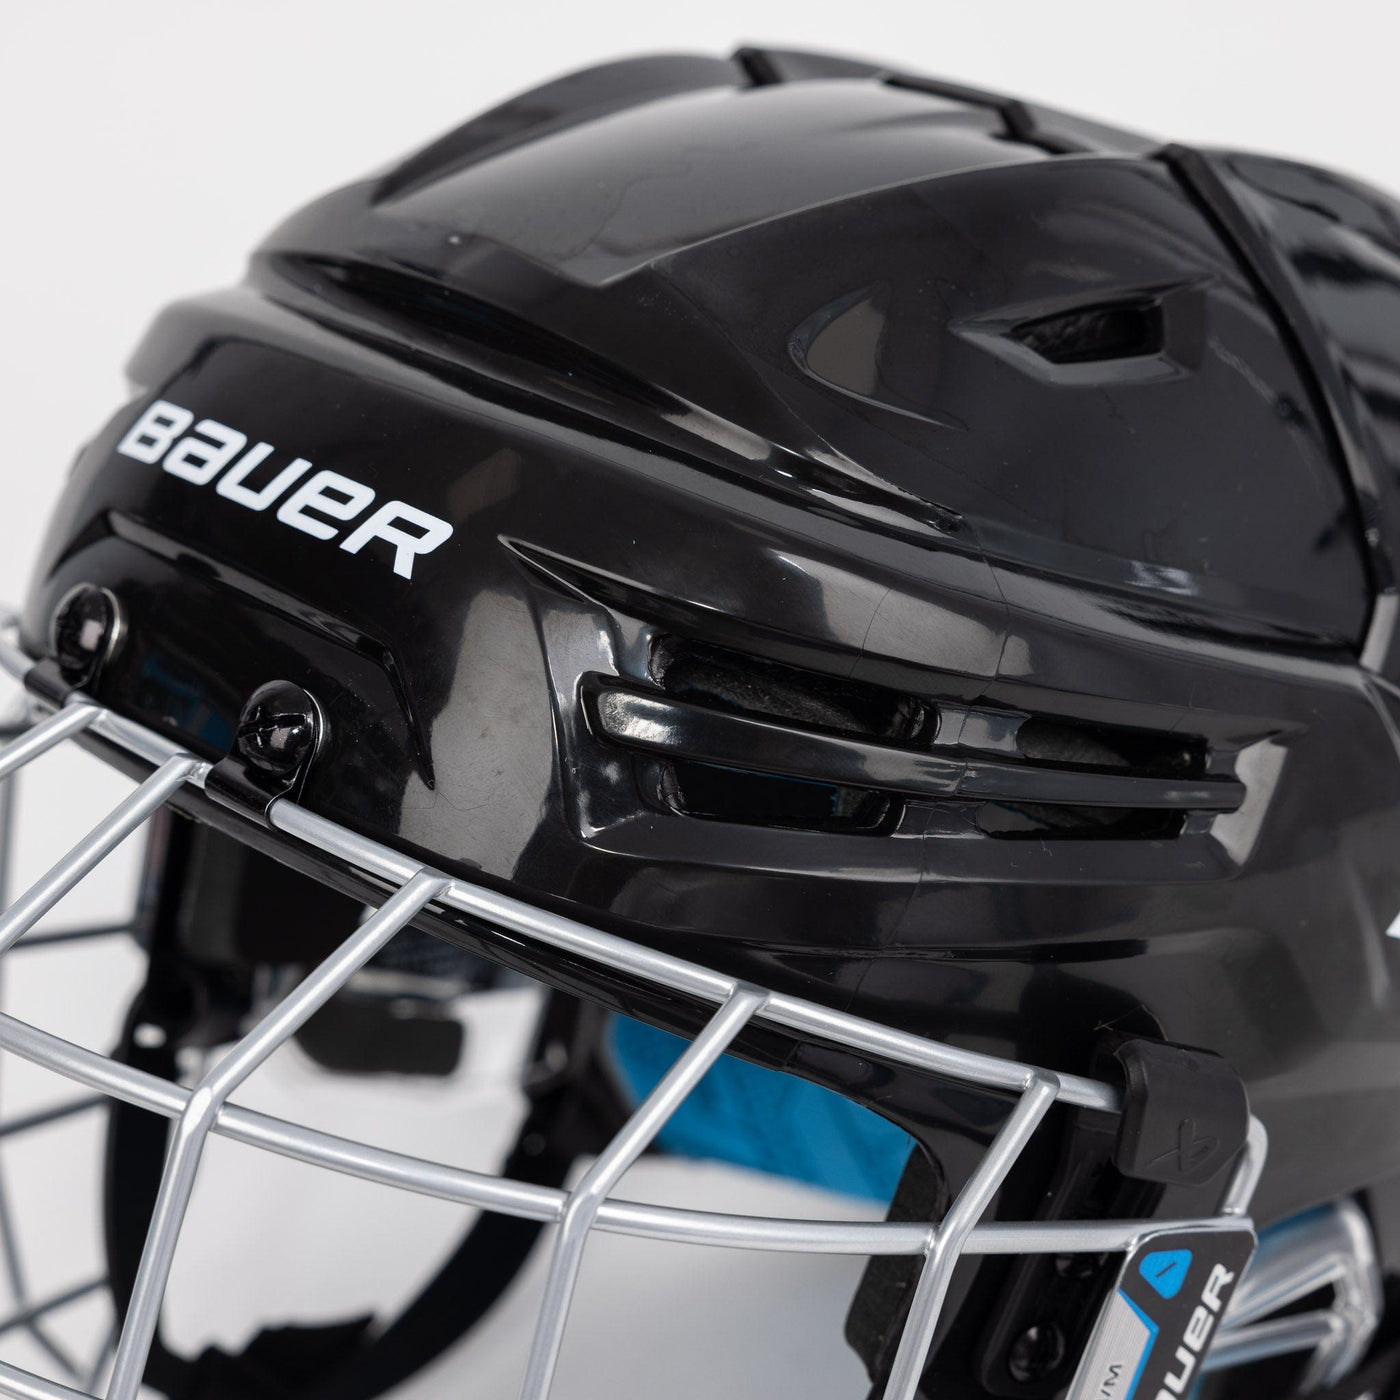 Bauer Re-AKT 65 Hockey Helmet / Cage Combo - The Hockey Shop Source For Sports